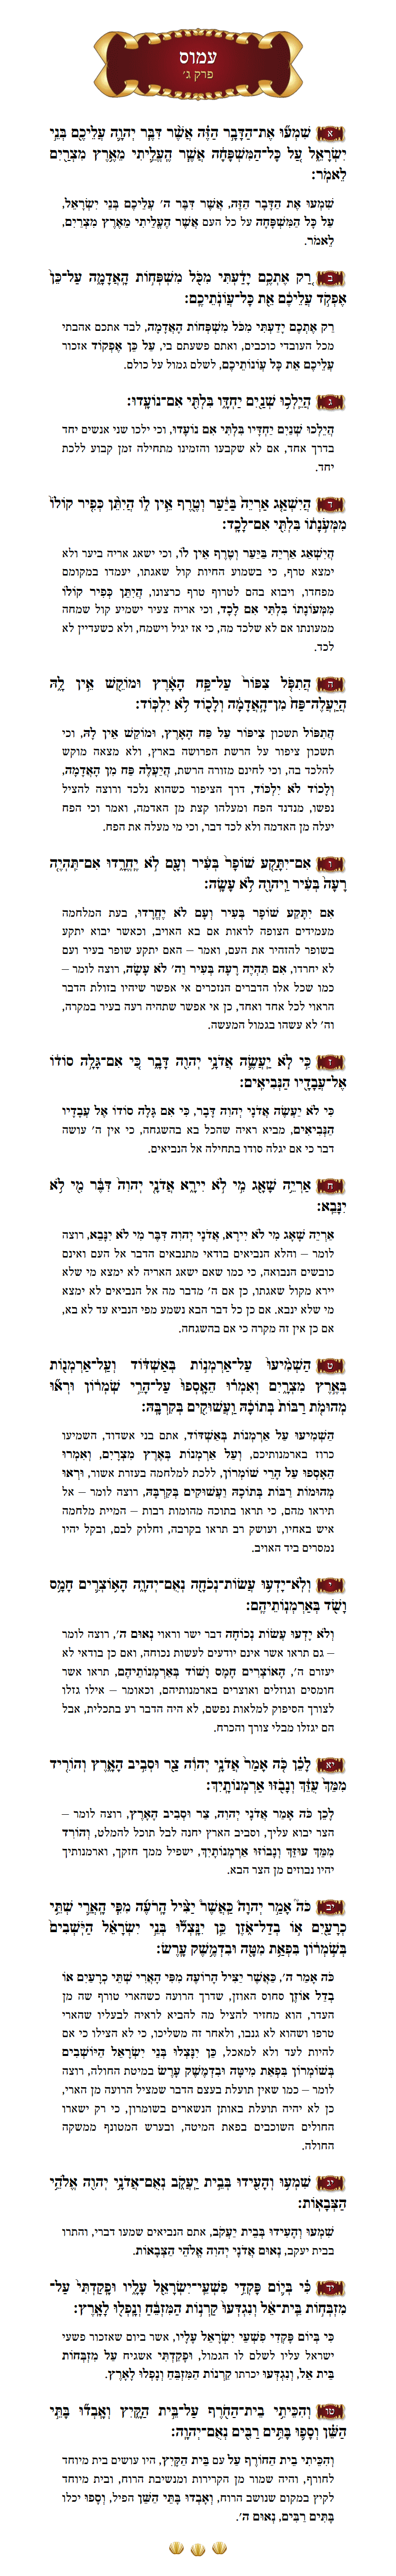 Sefer Amos Chapter 3 with commentary